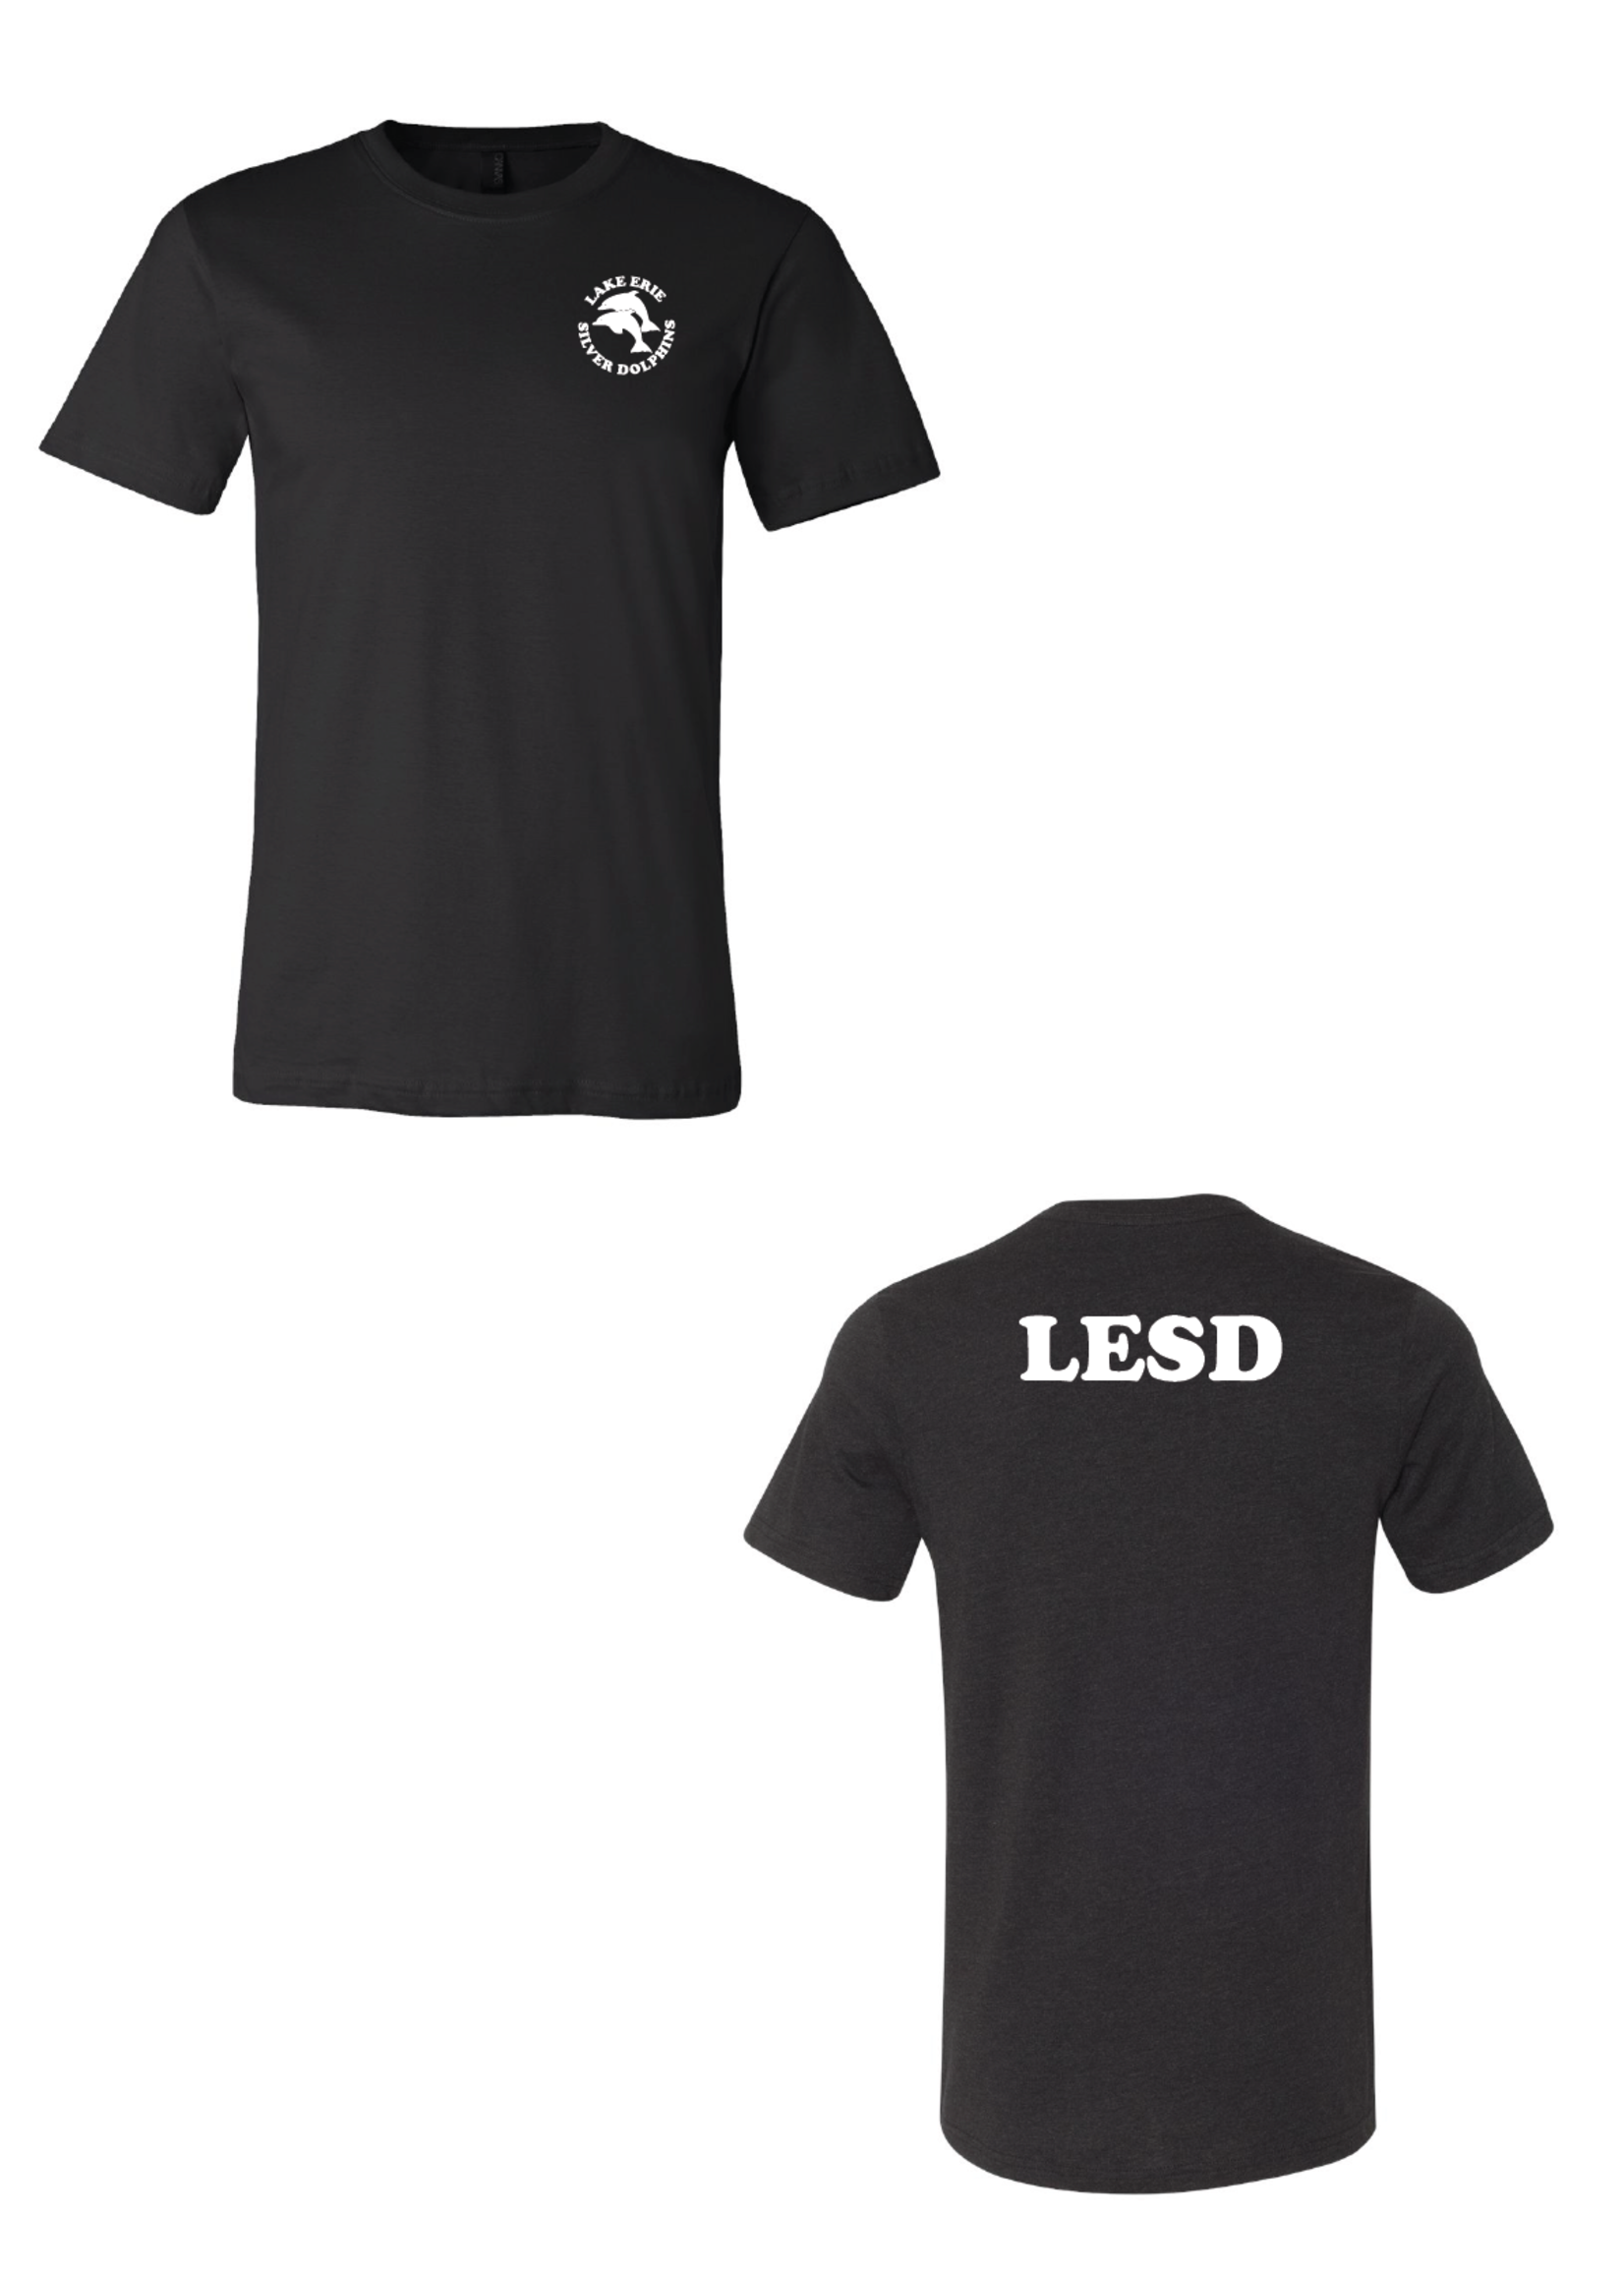 LESD T-shirt with small chest logo on front